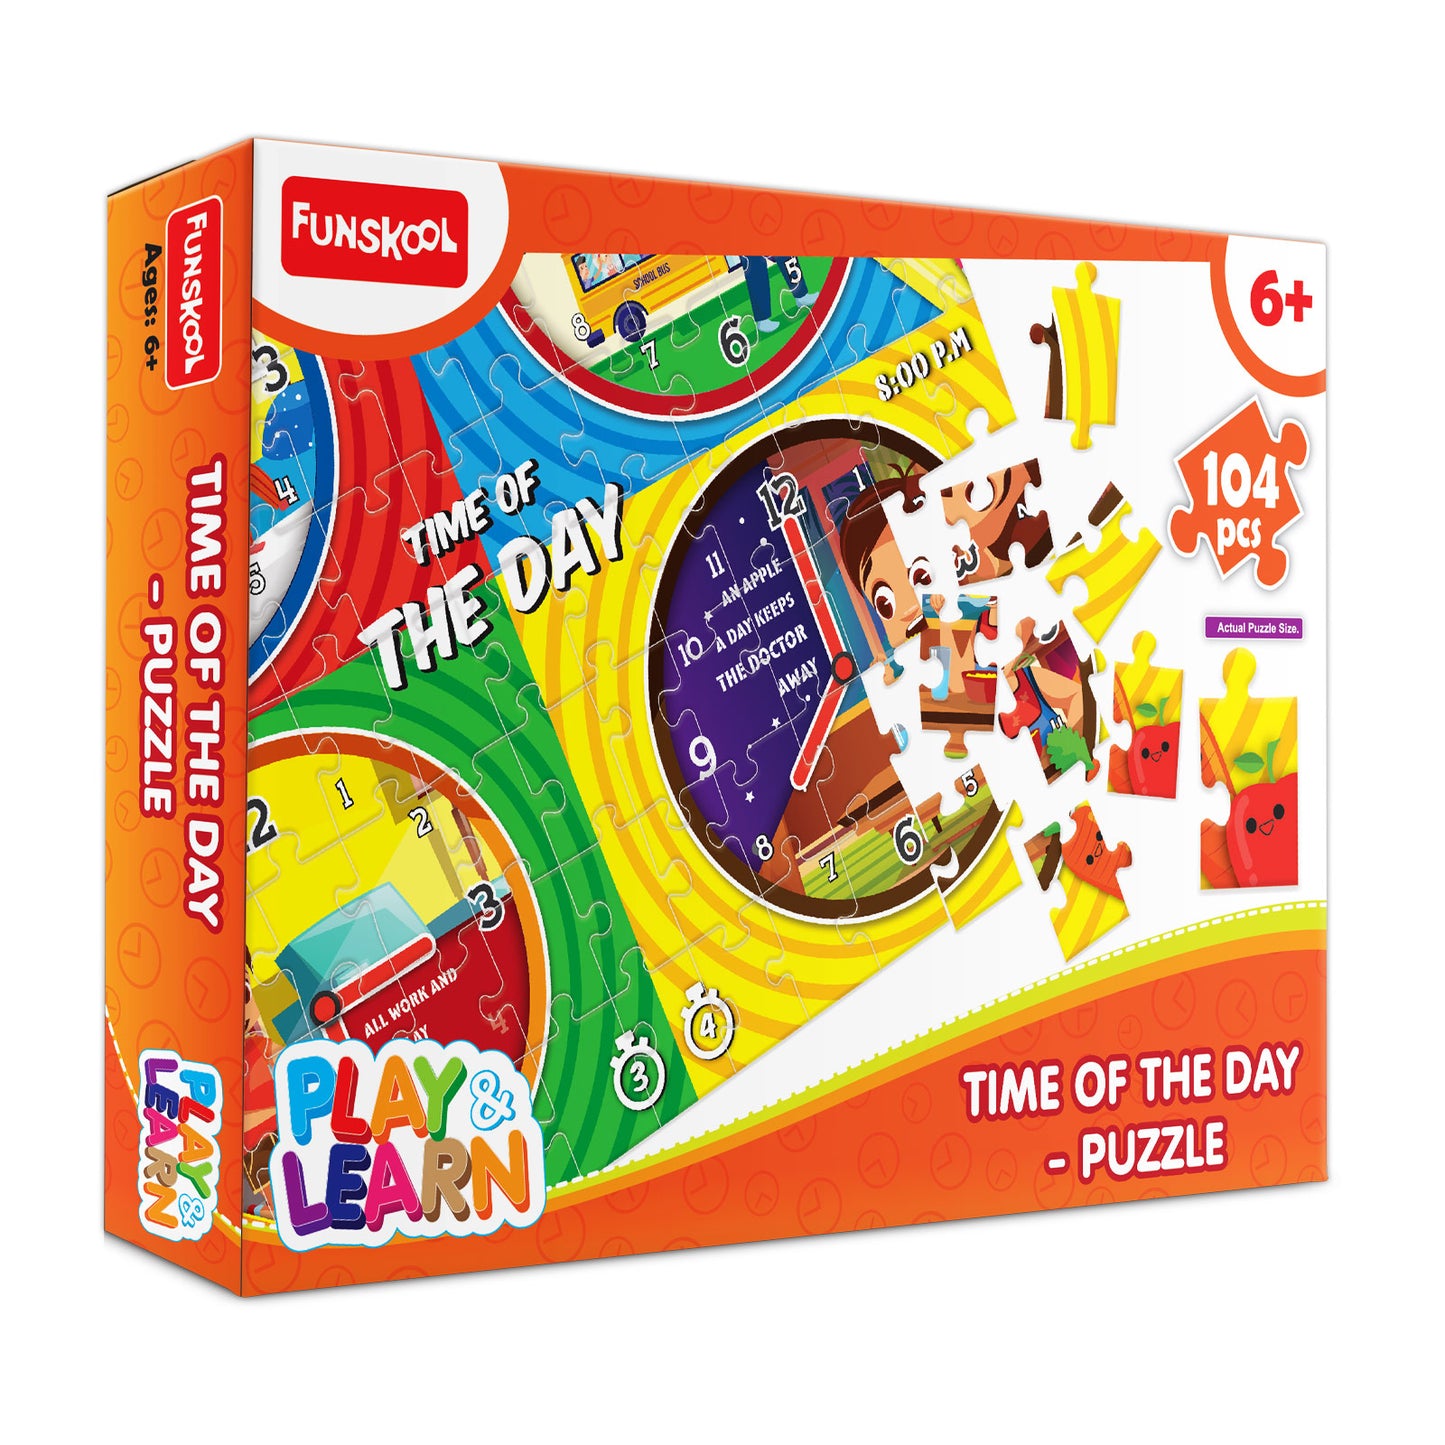  FUNSKOOL Time of the Day Puzzle